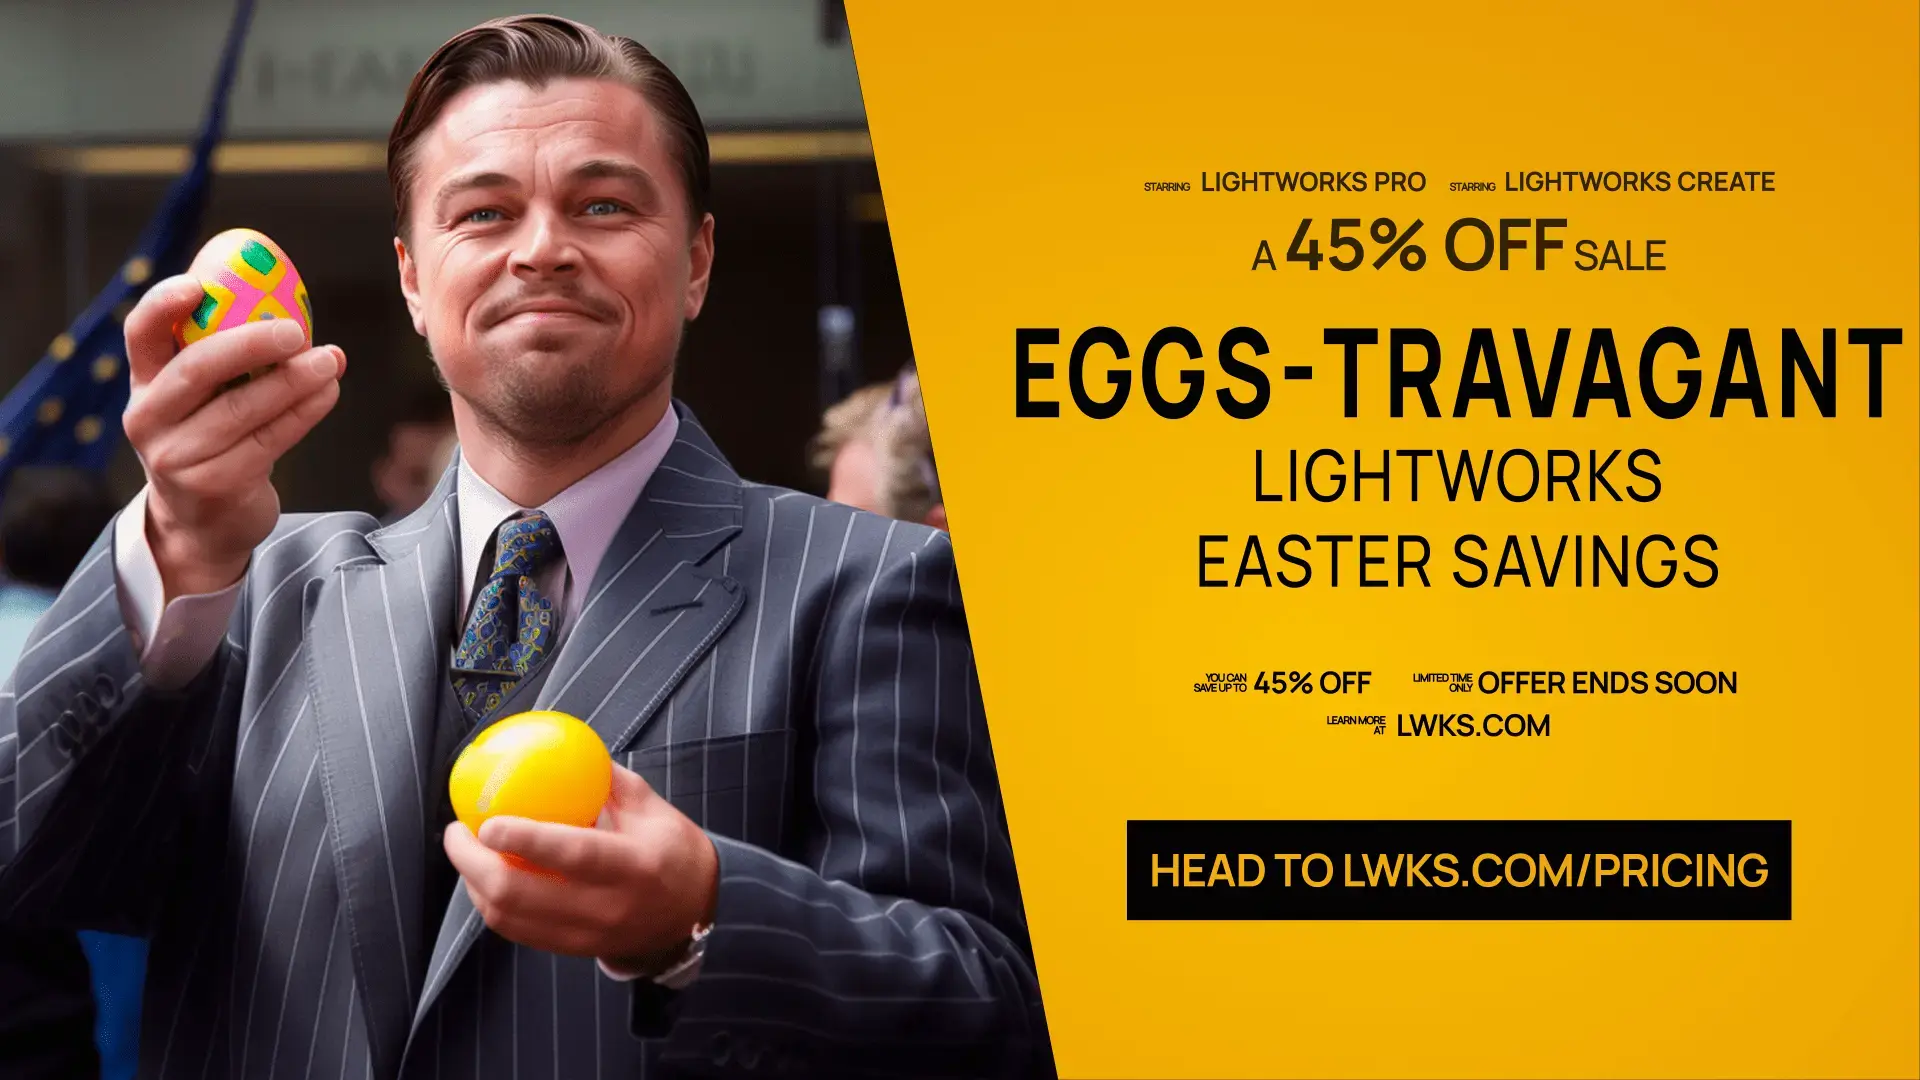 A wolf of wall street holding an easter egg